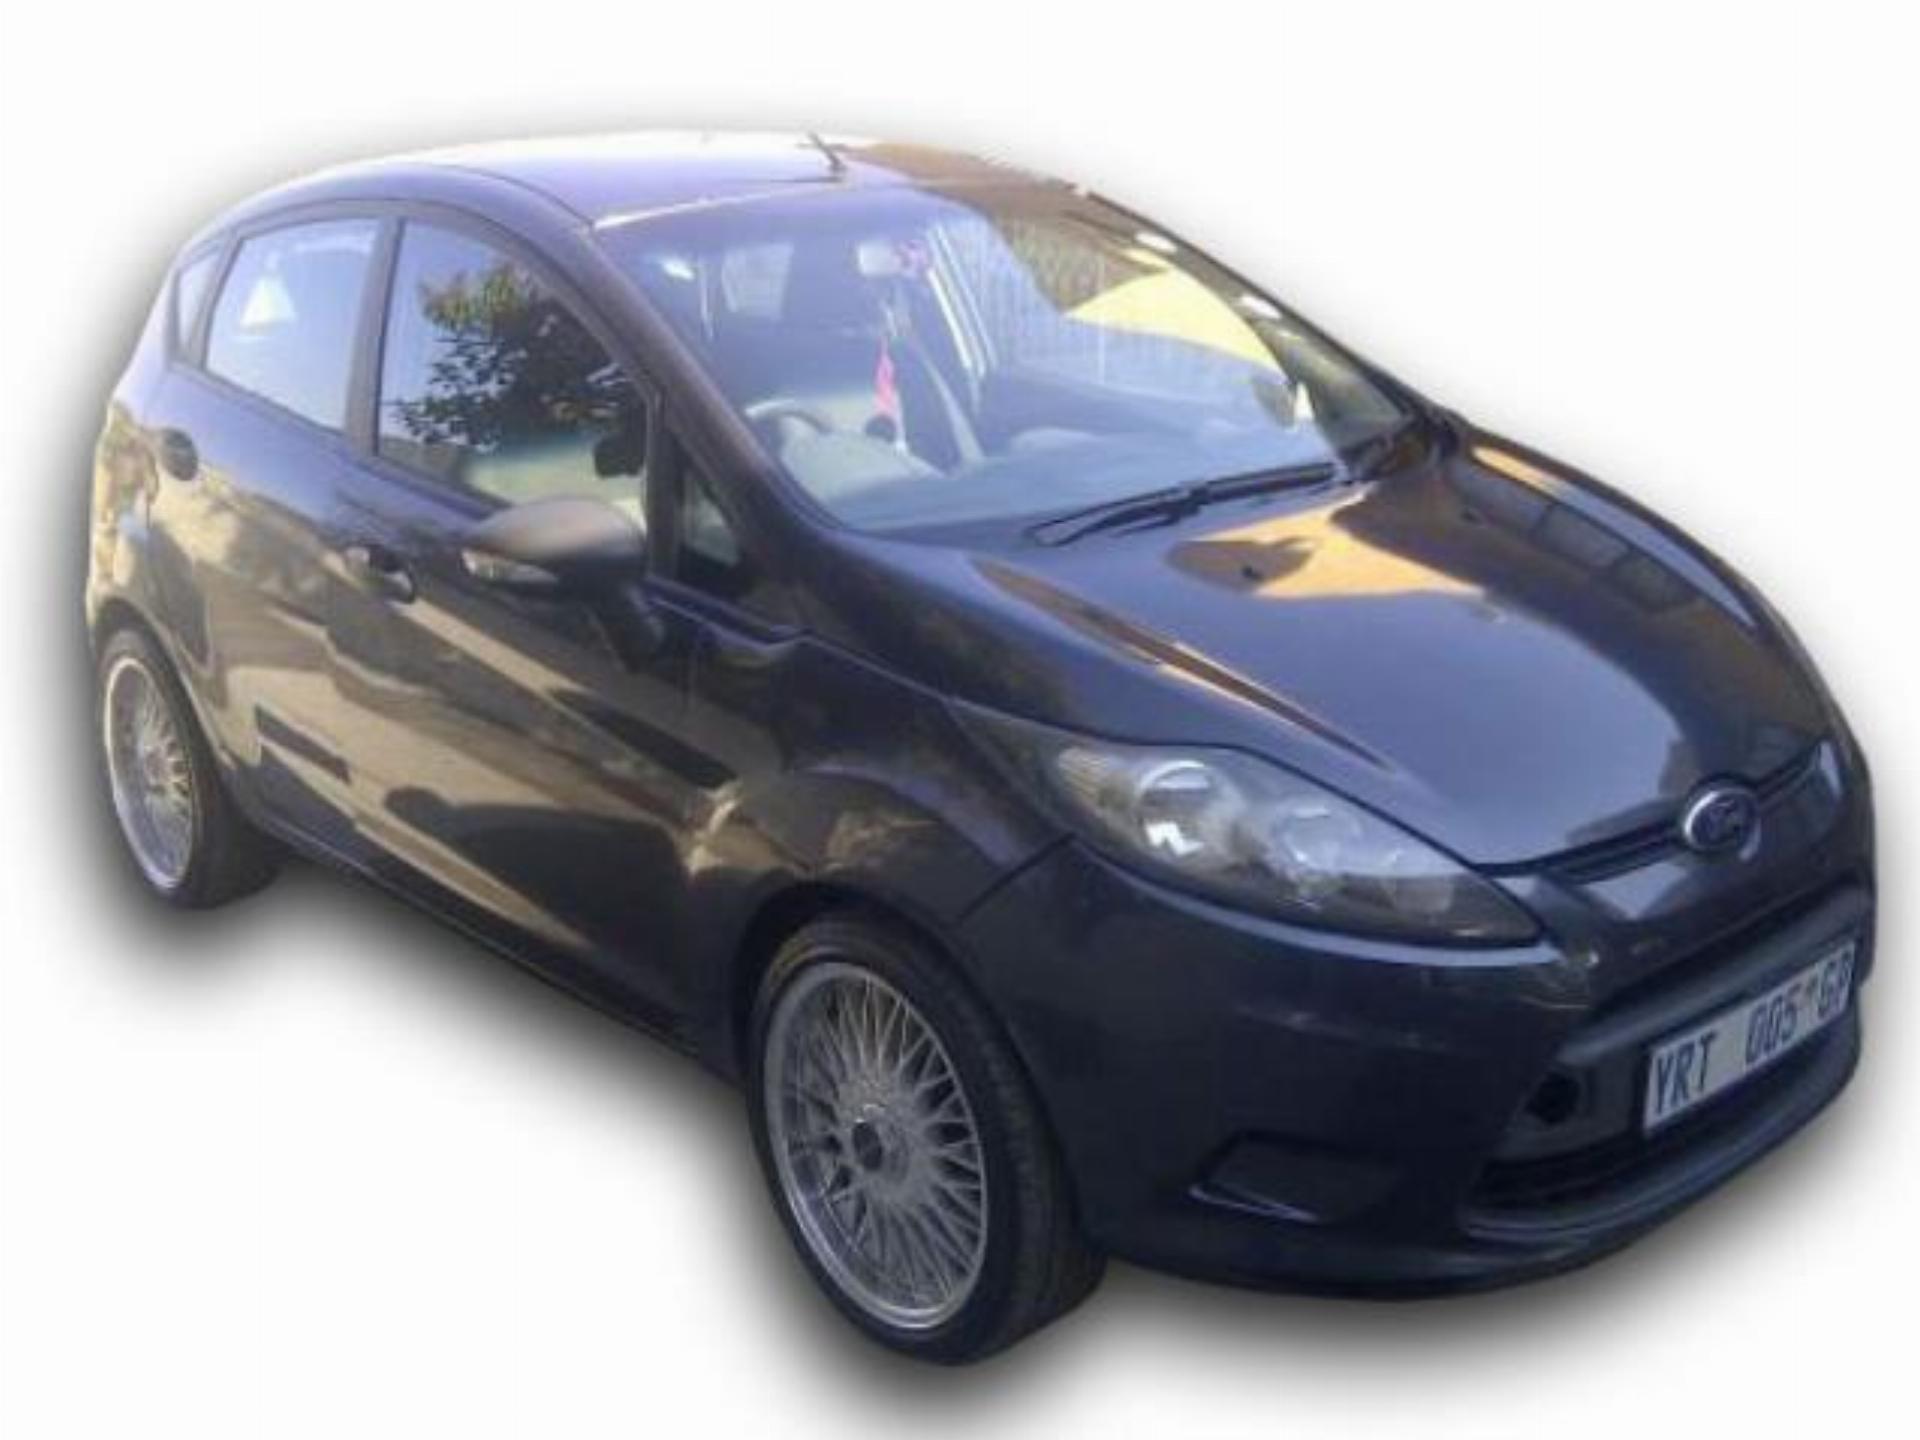 Ford Fiesta 1.6 Tdci Ambient